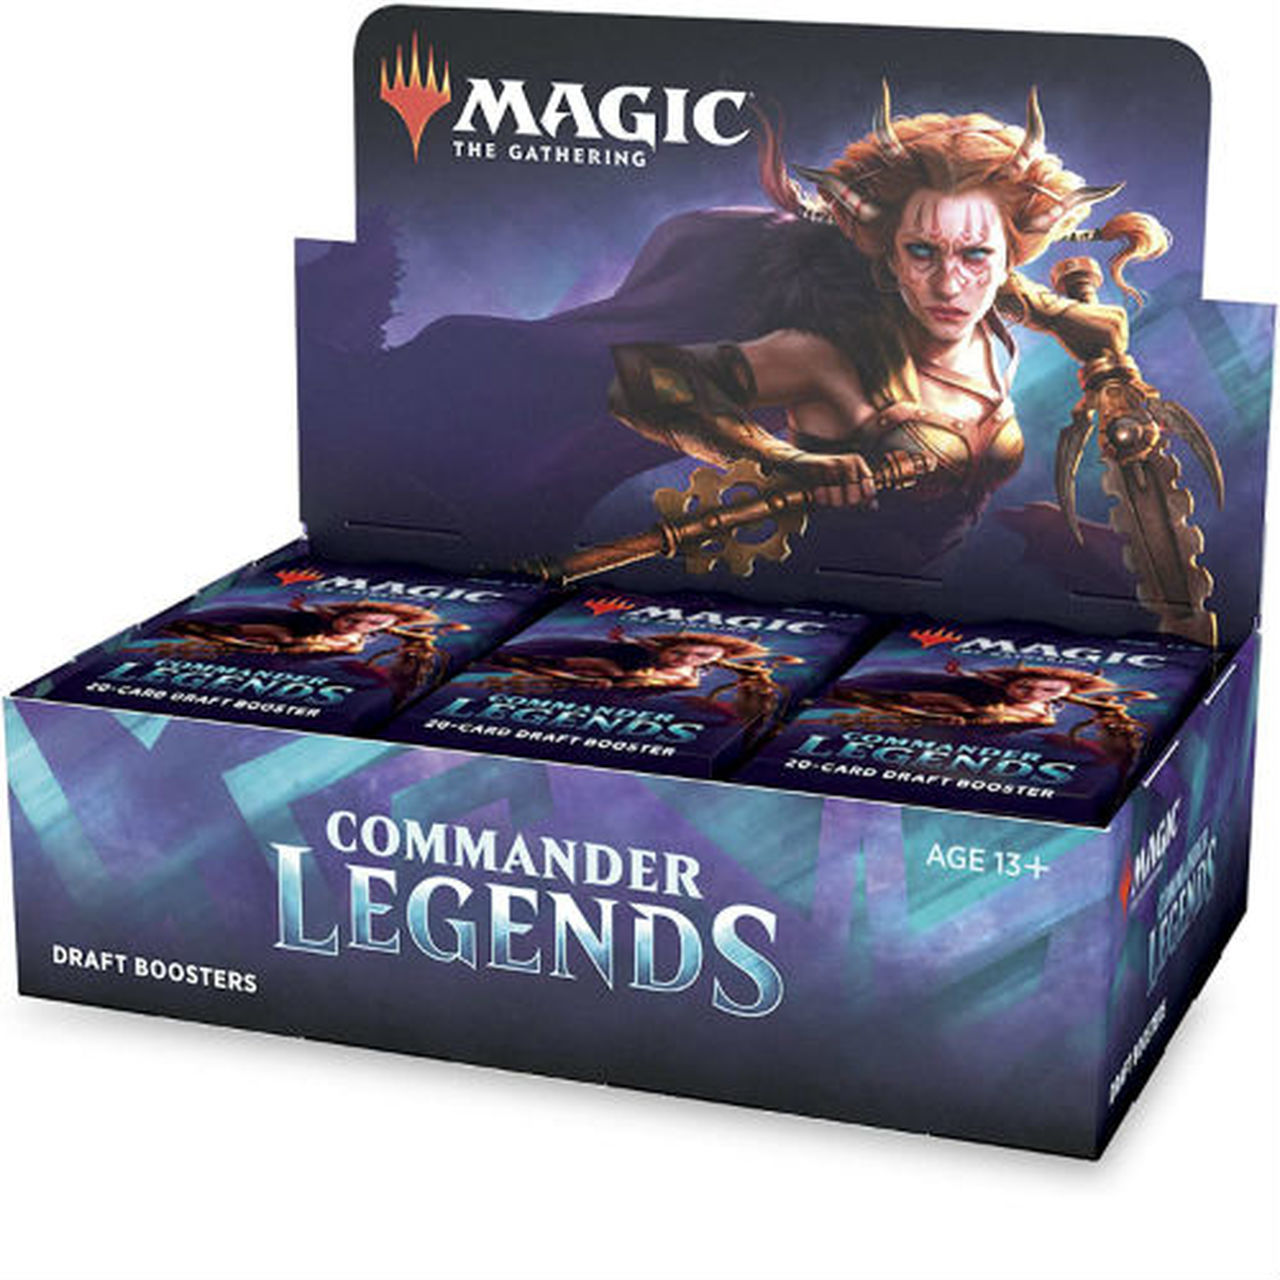 Good Morning Magic Details Mechanic That Almost Made It To Commander Legends